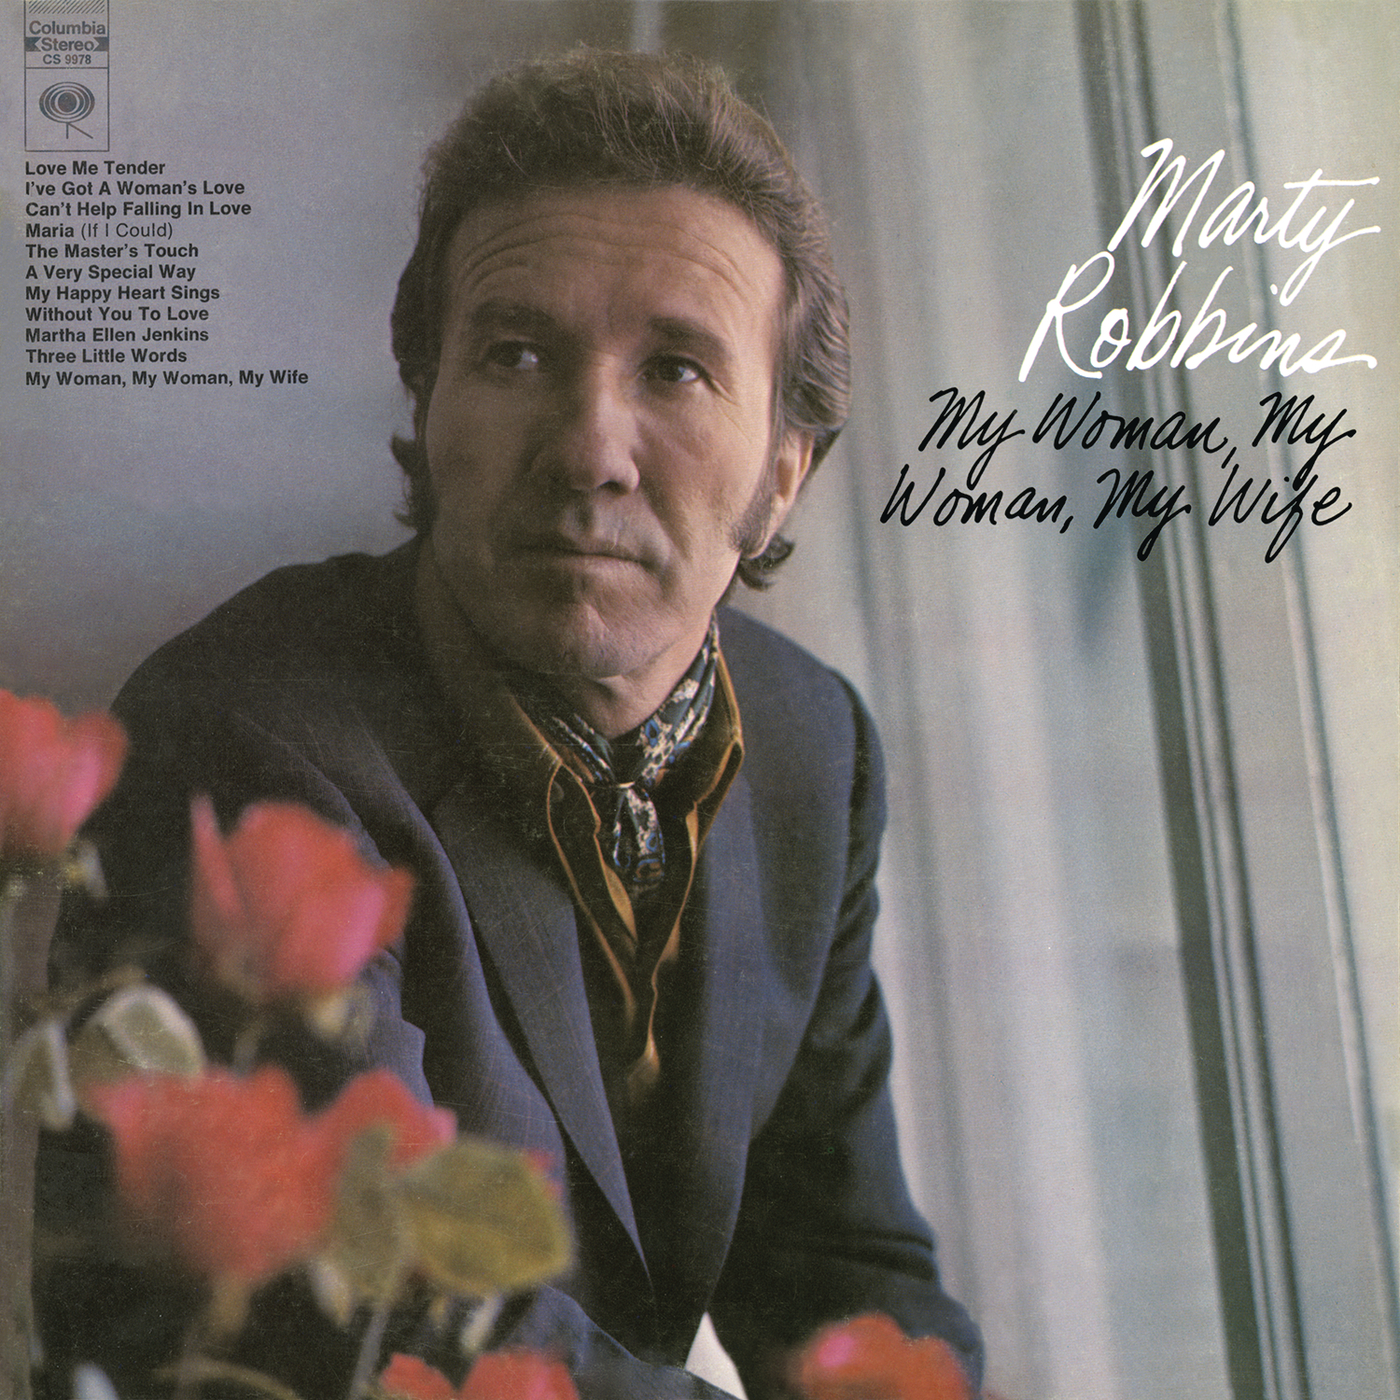 Can't Help Falling In Love/Marty Robbins